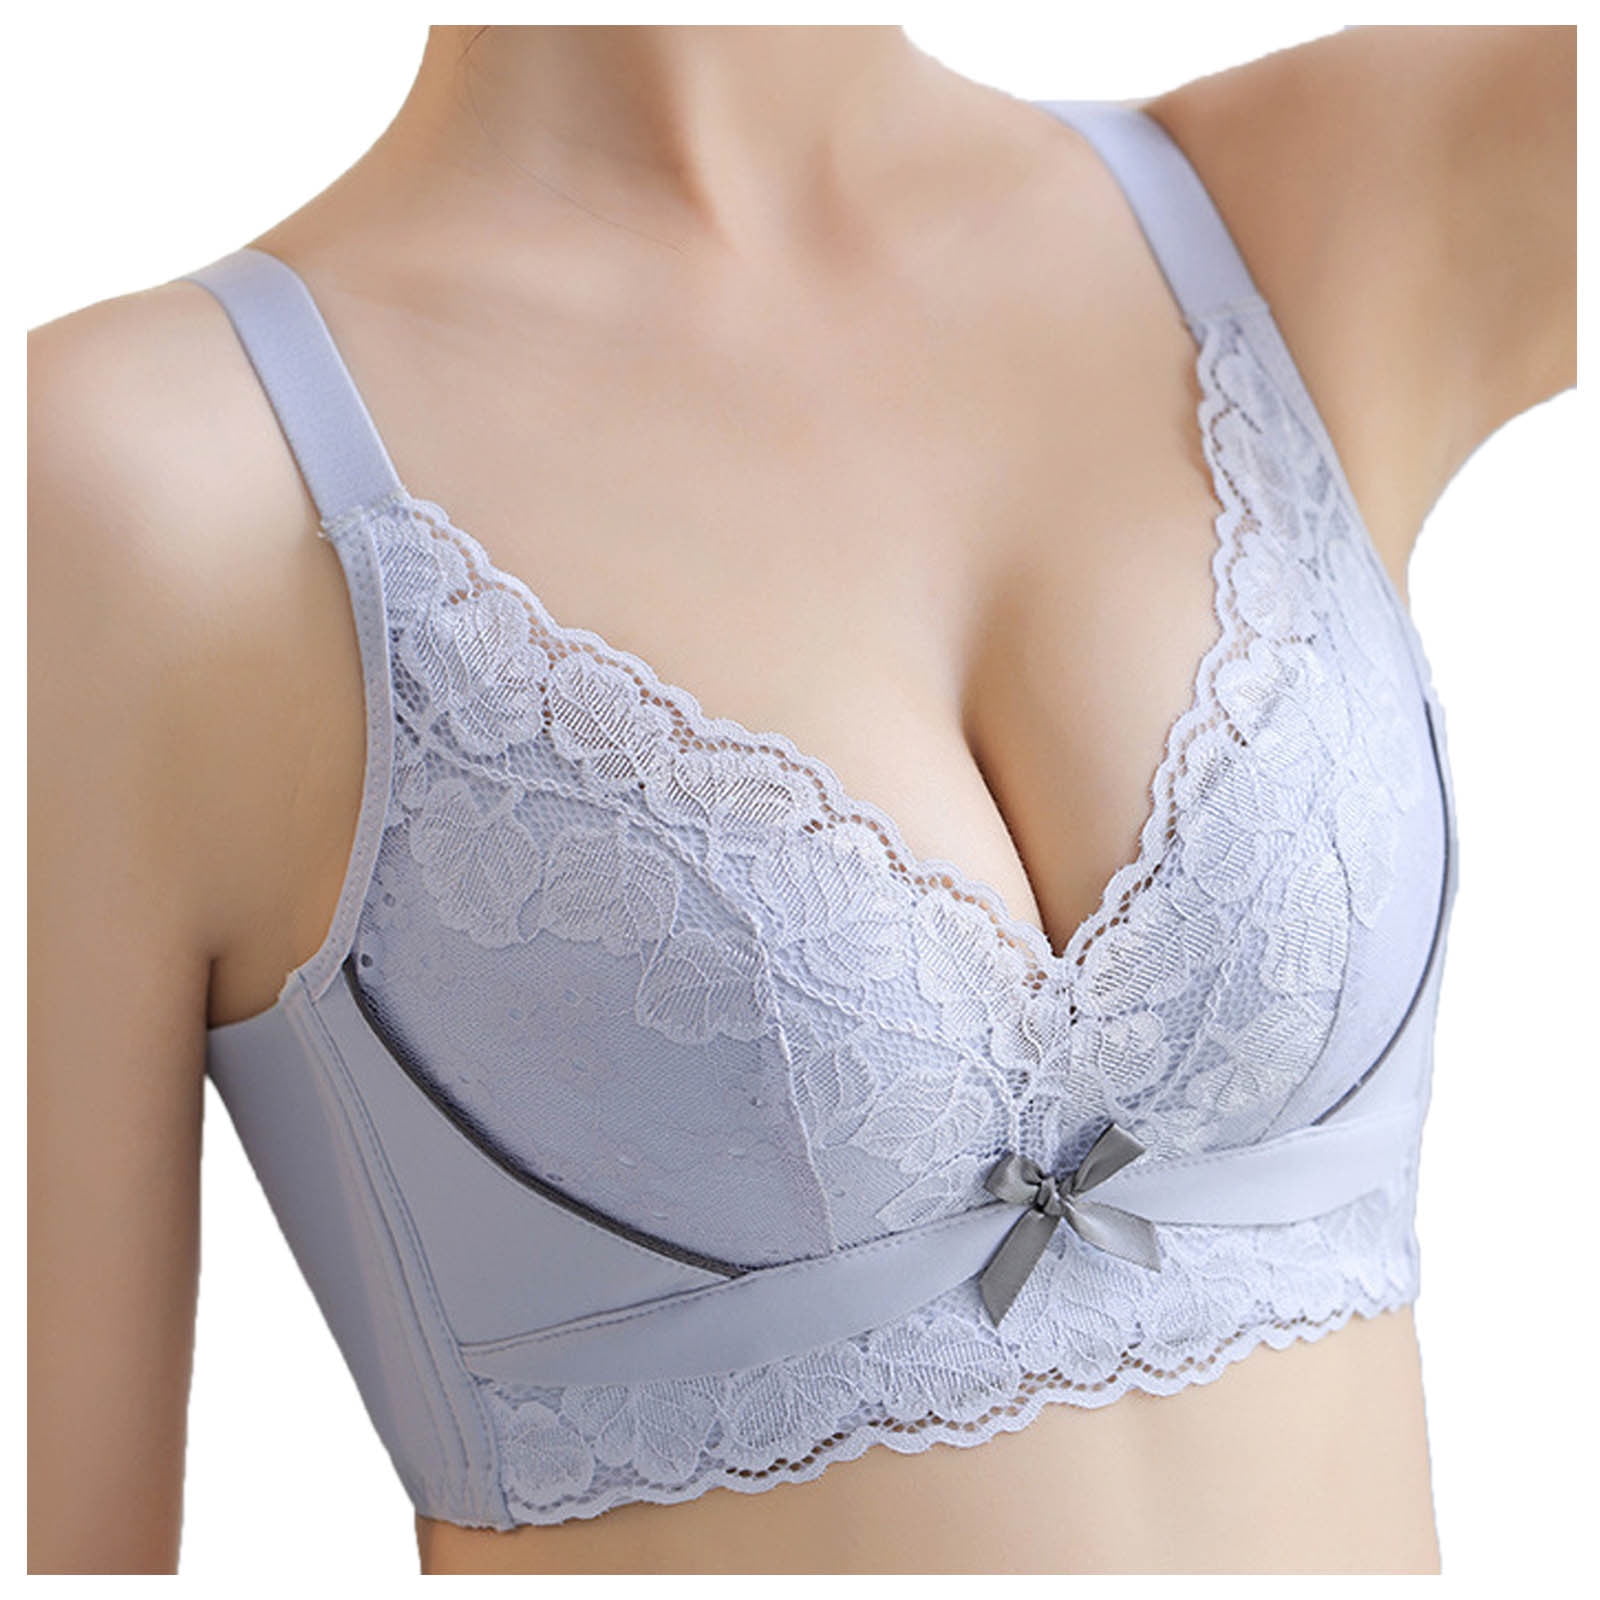 Mrat Clearance Wireless Bras with Support and Lift Push up Lace